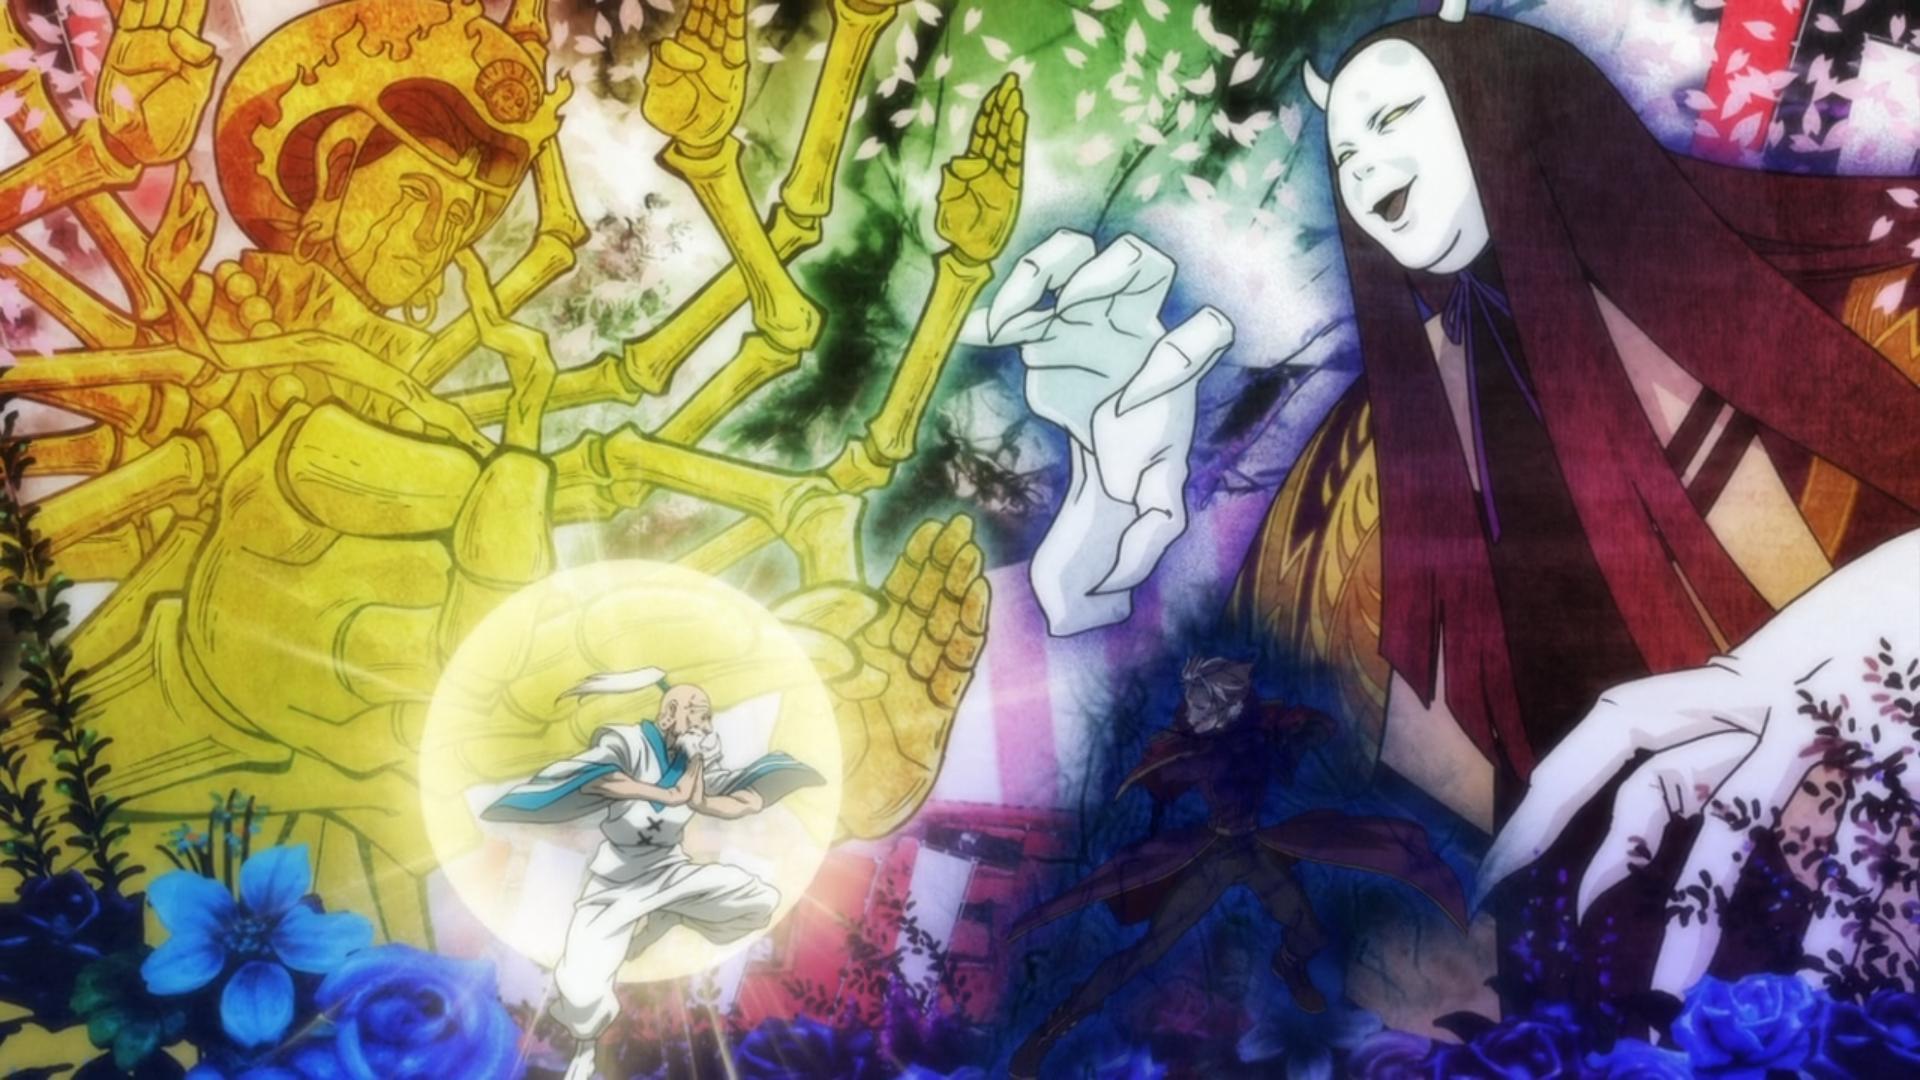 Made a screenshot during the new Hunter x Hunter movie, turned out